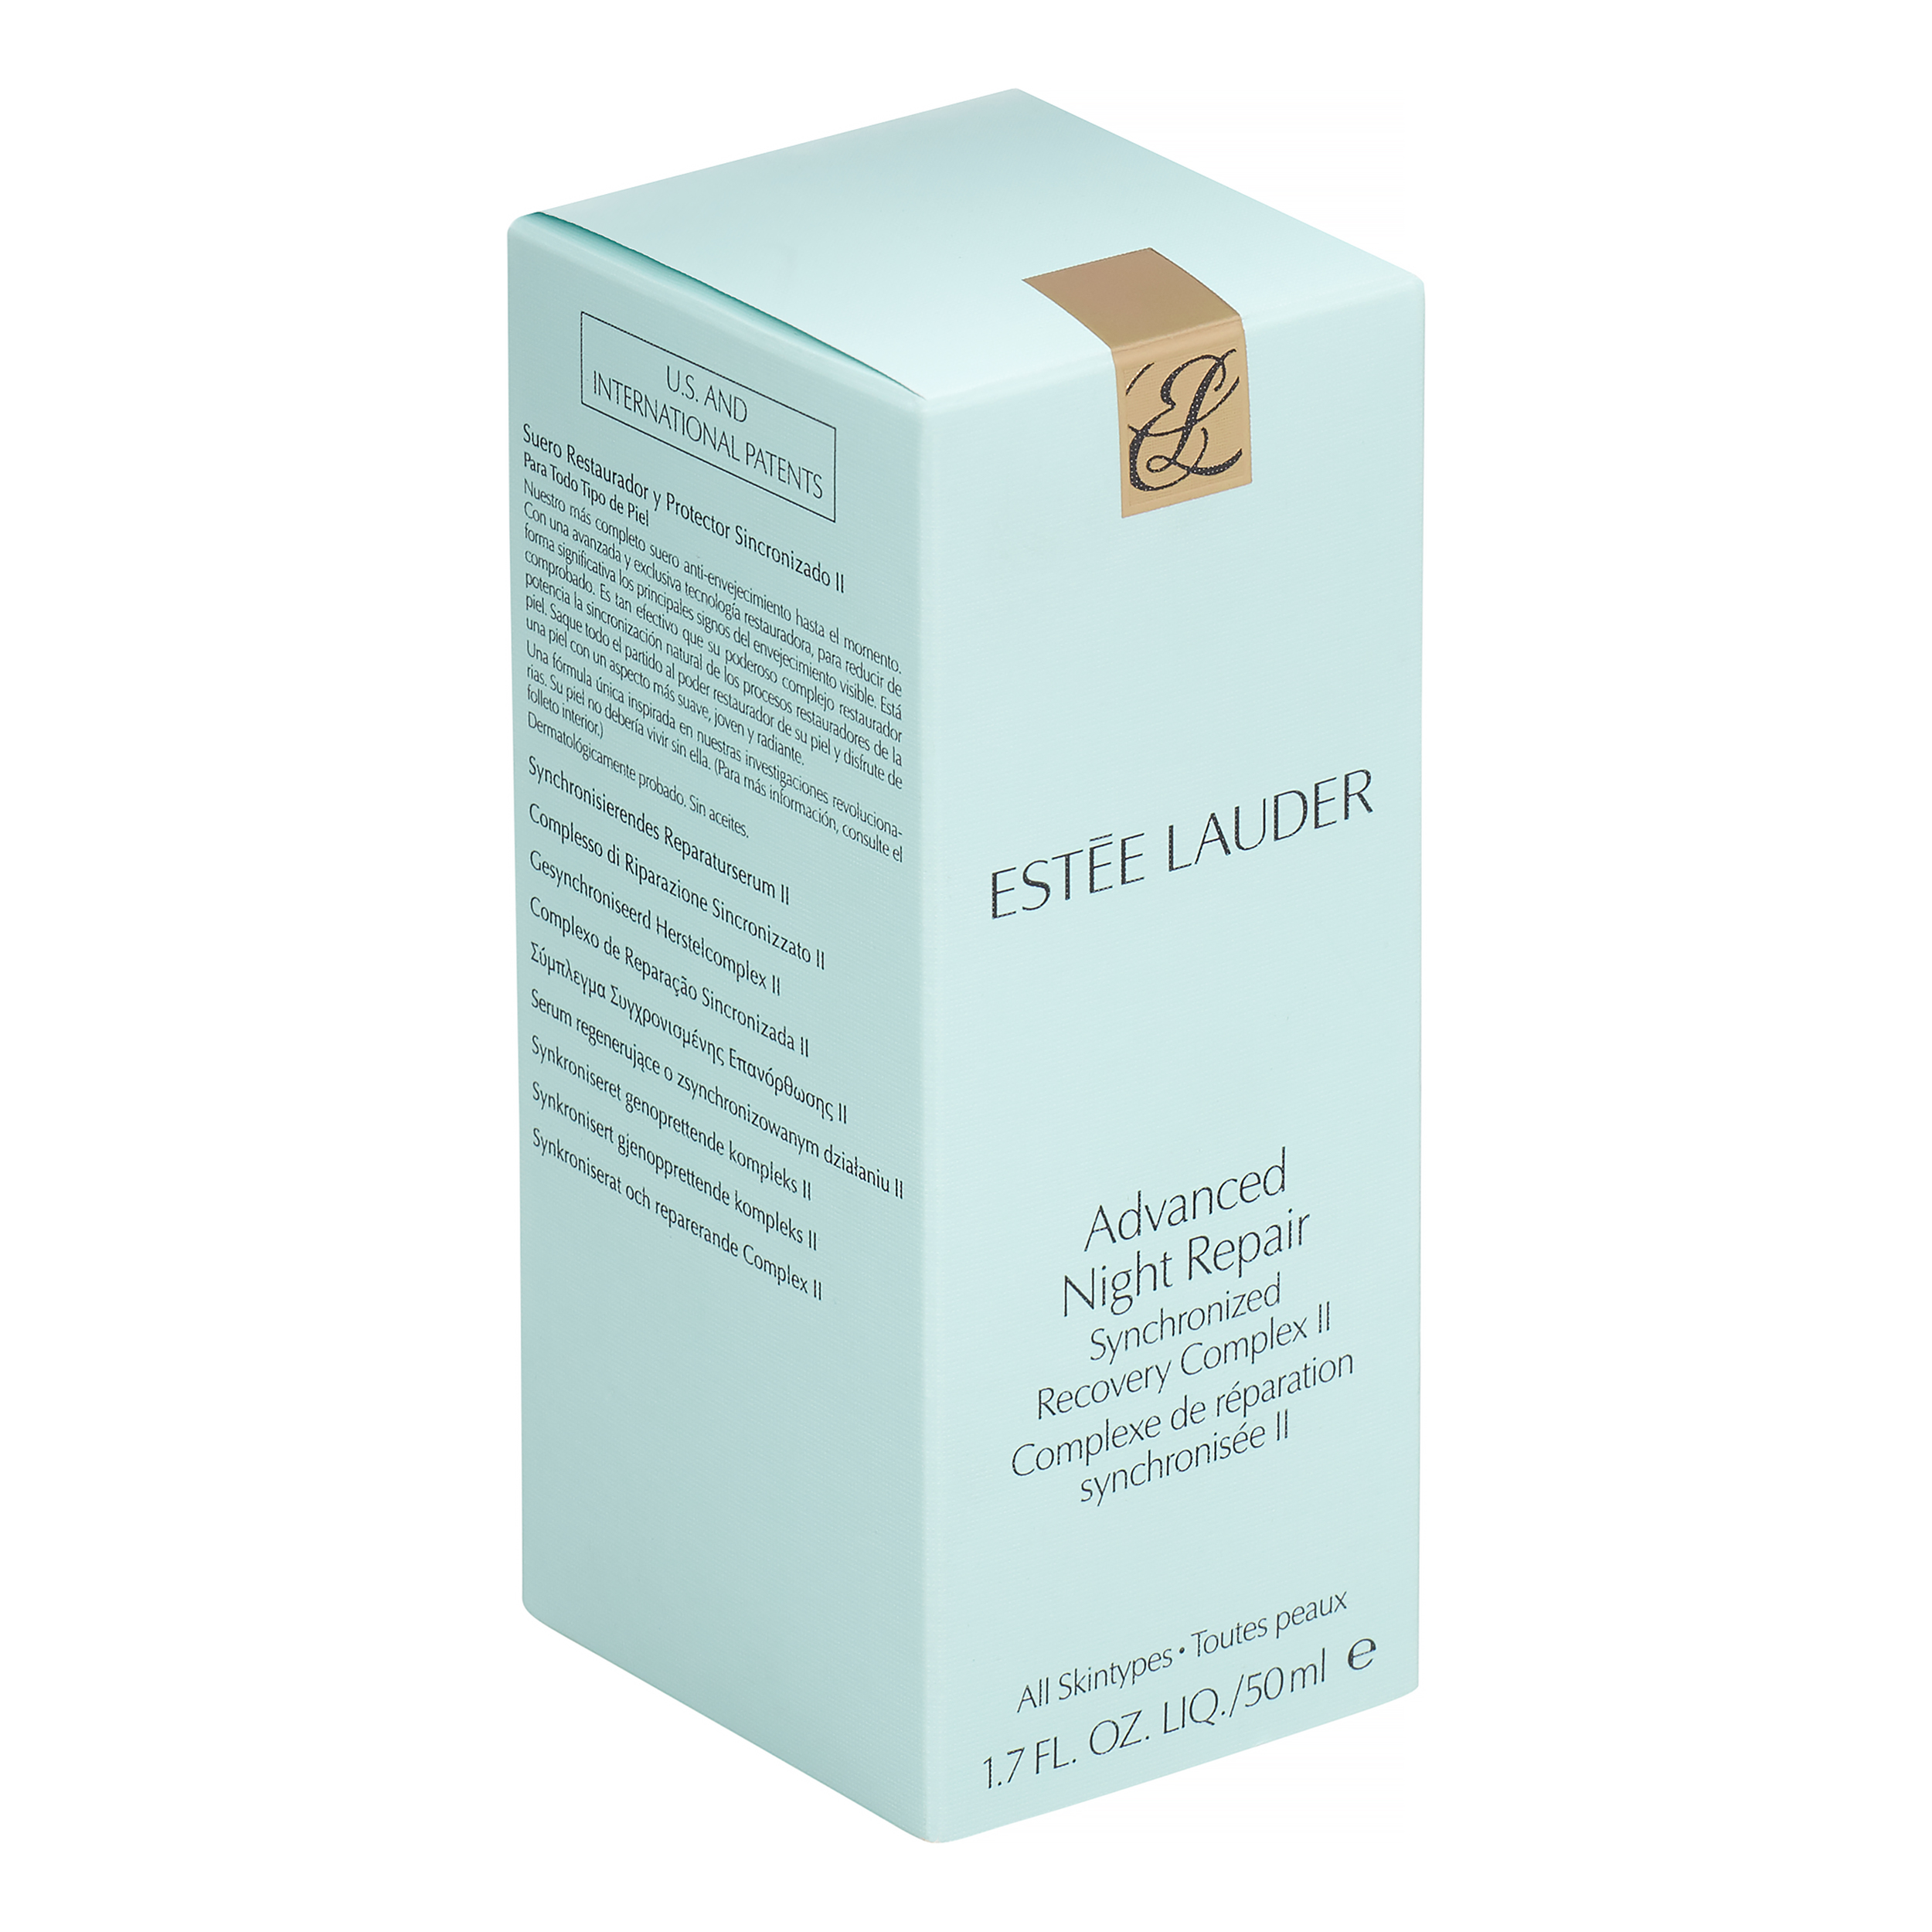 (Deal: 20% Off) Estee Lauder Advanced Night Repair Synchronized Recovery Complex II Face Serum, 1.7 Oz - image 2 of 6